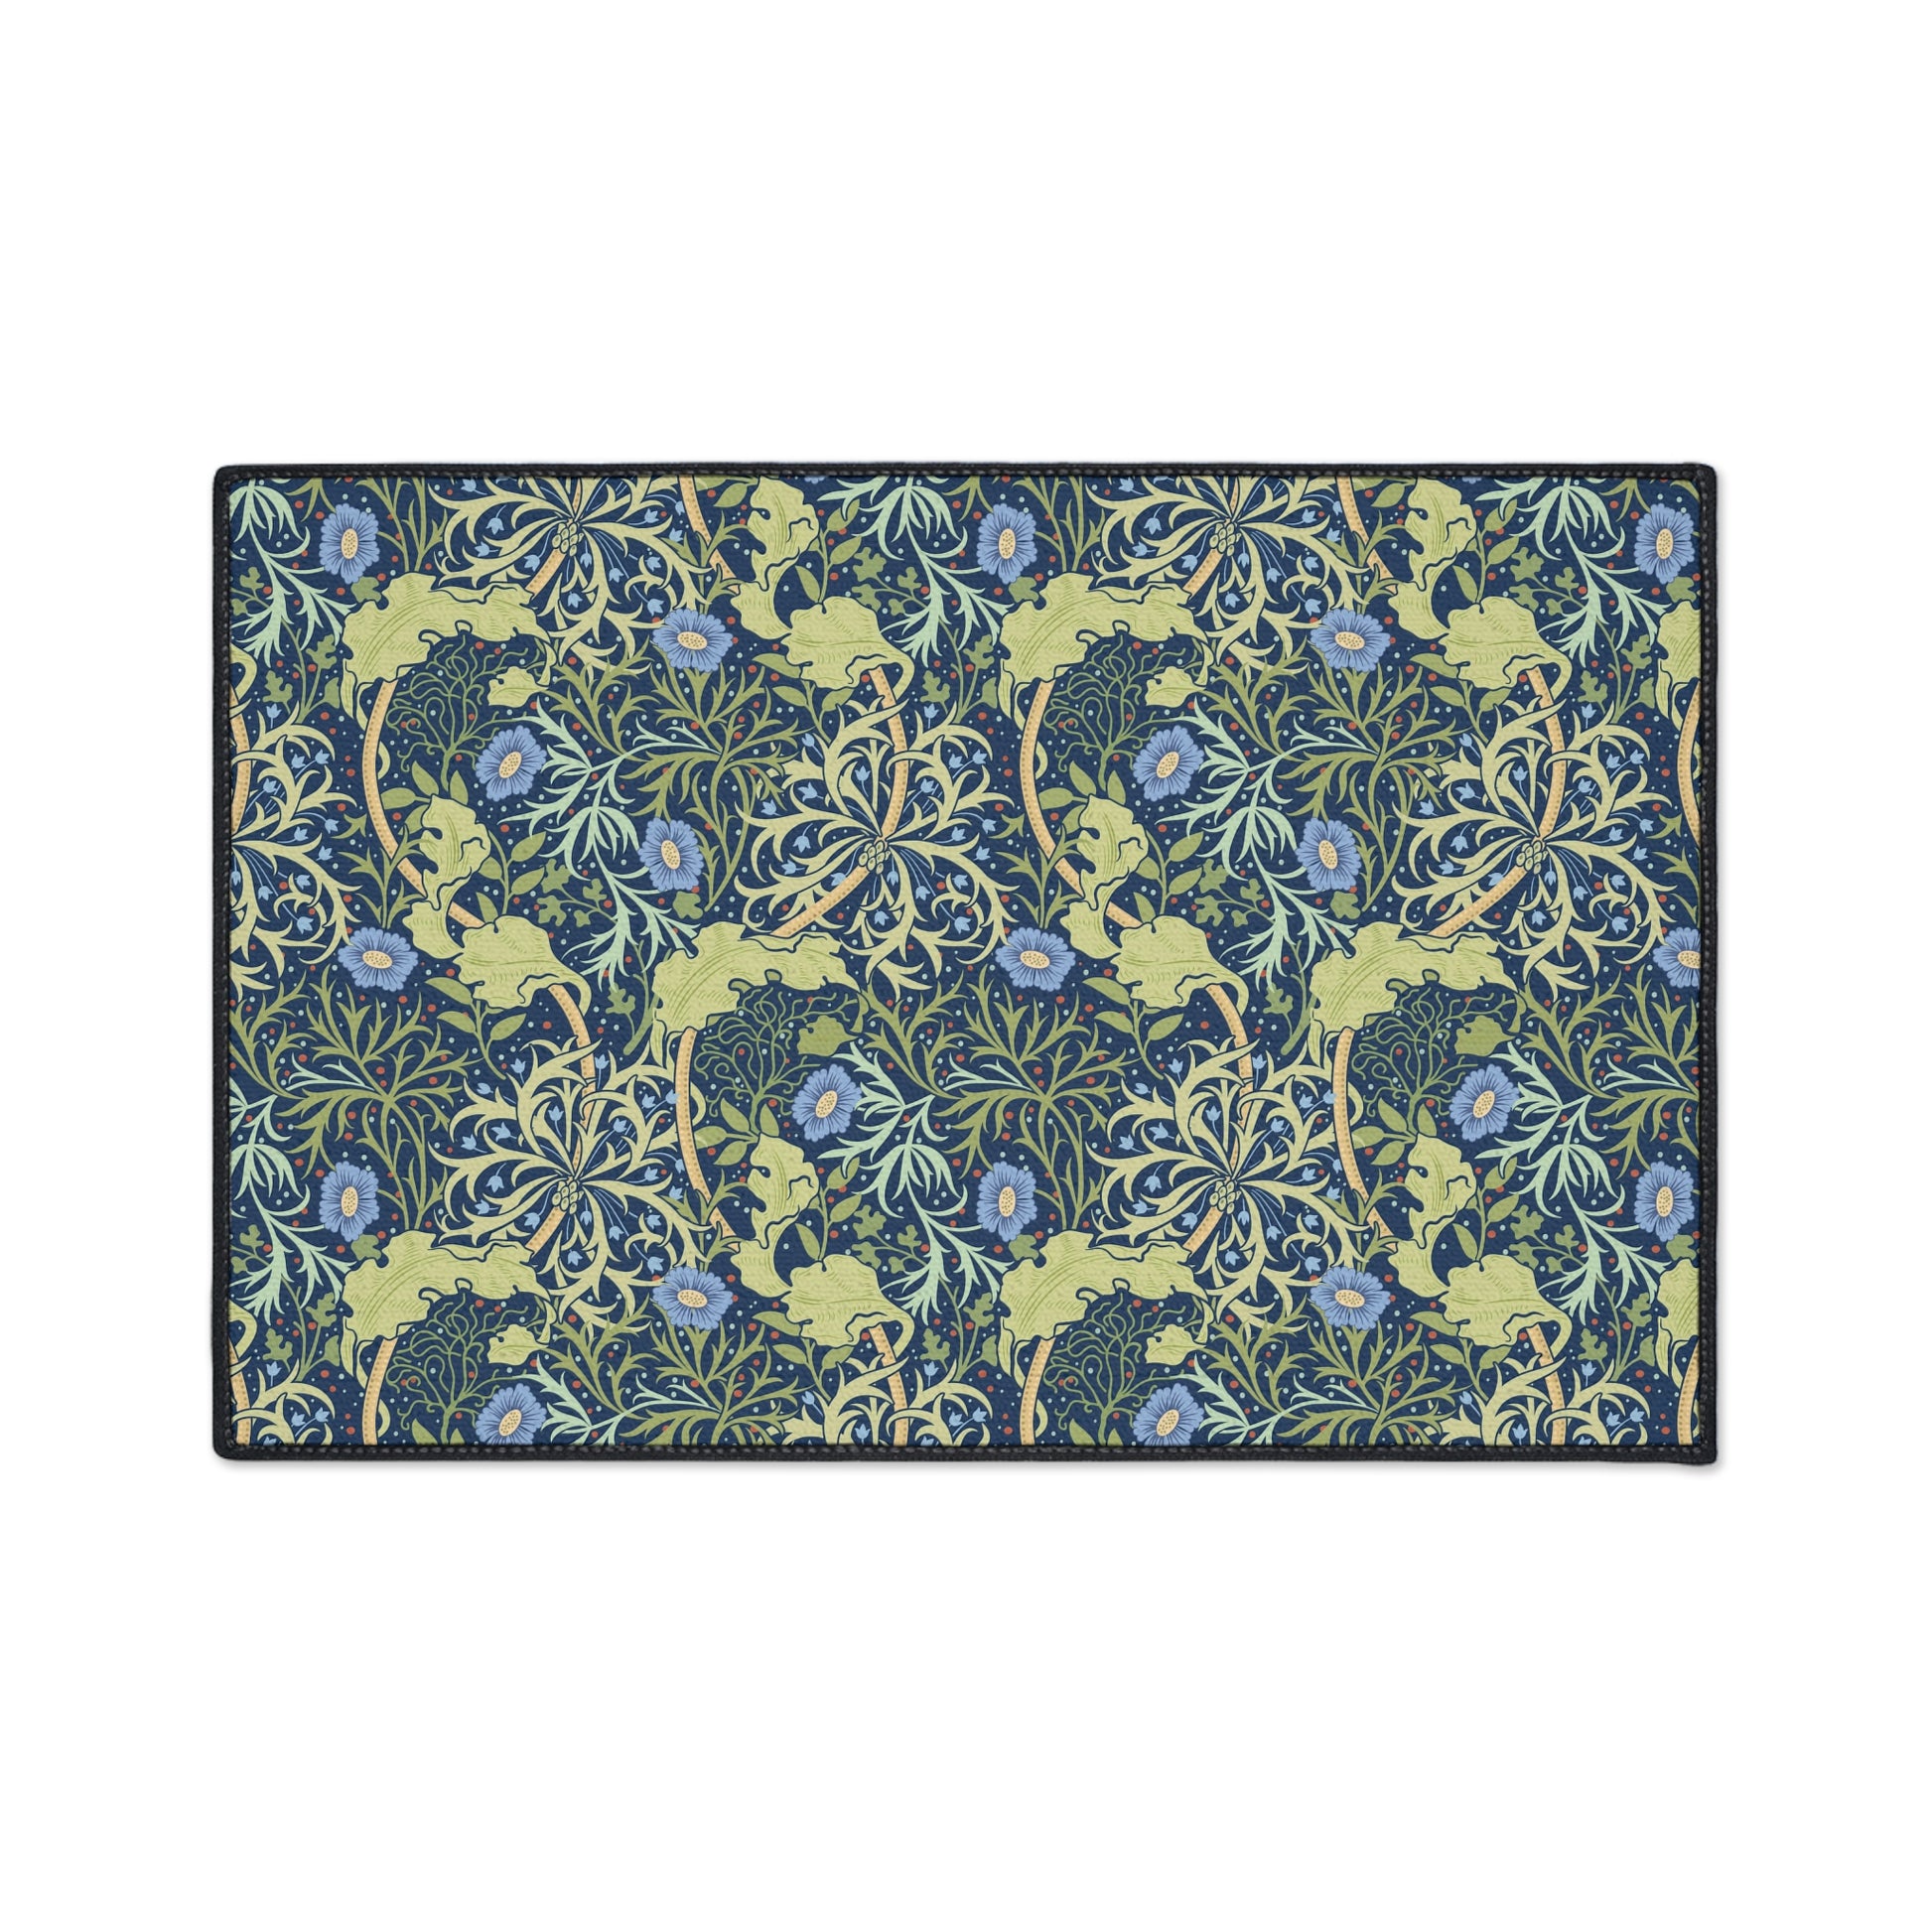 william-morris-co-heavy-duty-floor-mat-seaweed-collection-blue-flowers-6